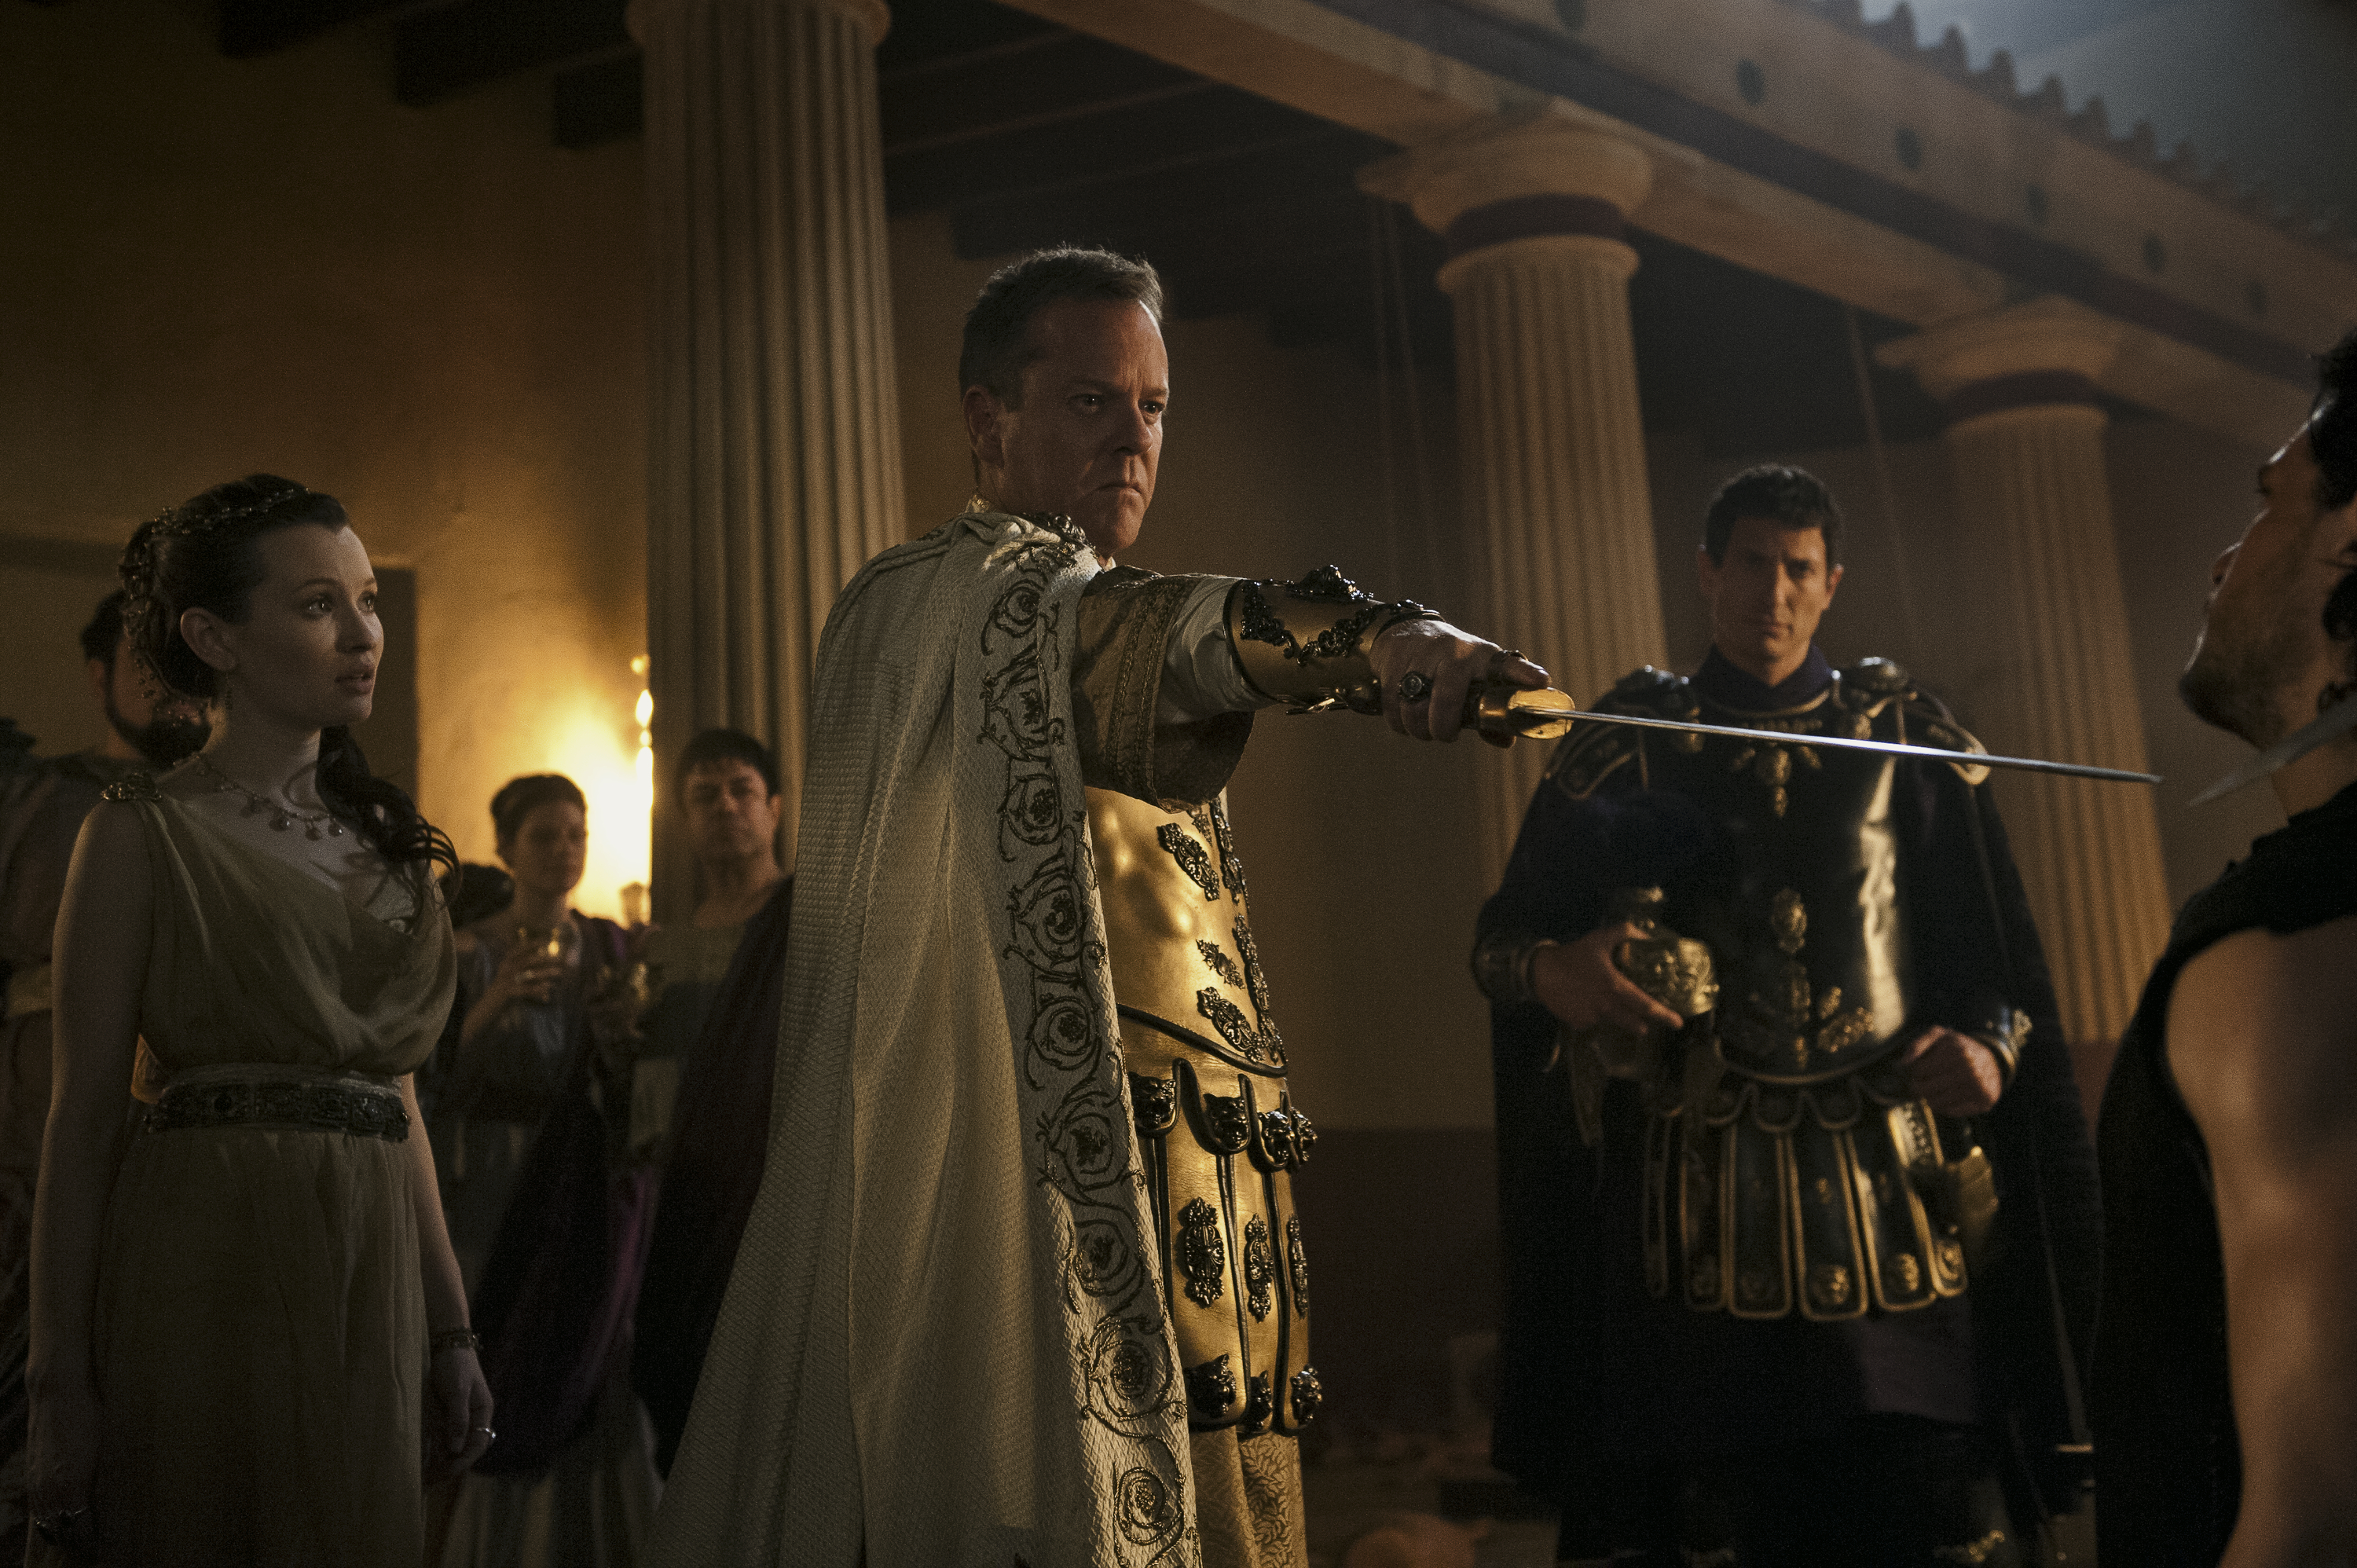 Corvus (Kiefer Sutherland) orders Milo (Kit Harington) punished after he and Cassia (Emily Browning) return from a horseback ride as Proculus (Sasha Roiz) watches in <em>Pompeii</em>. (Photo: Sony Pictures)